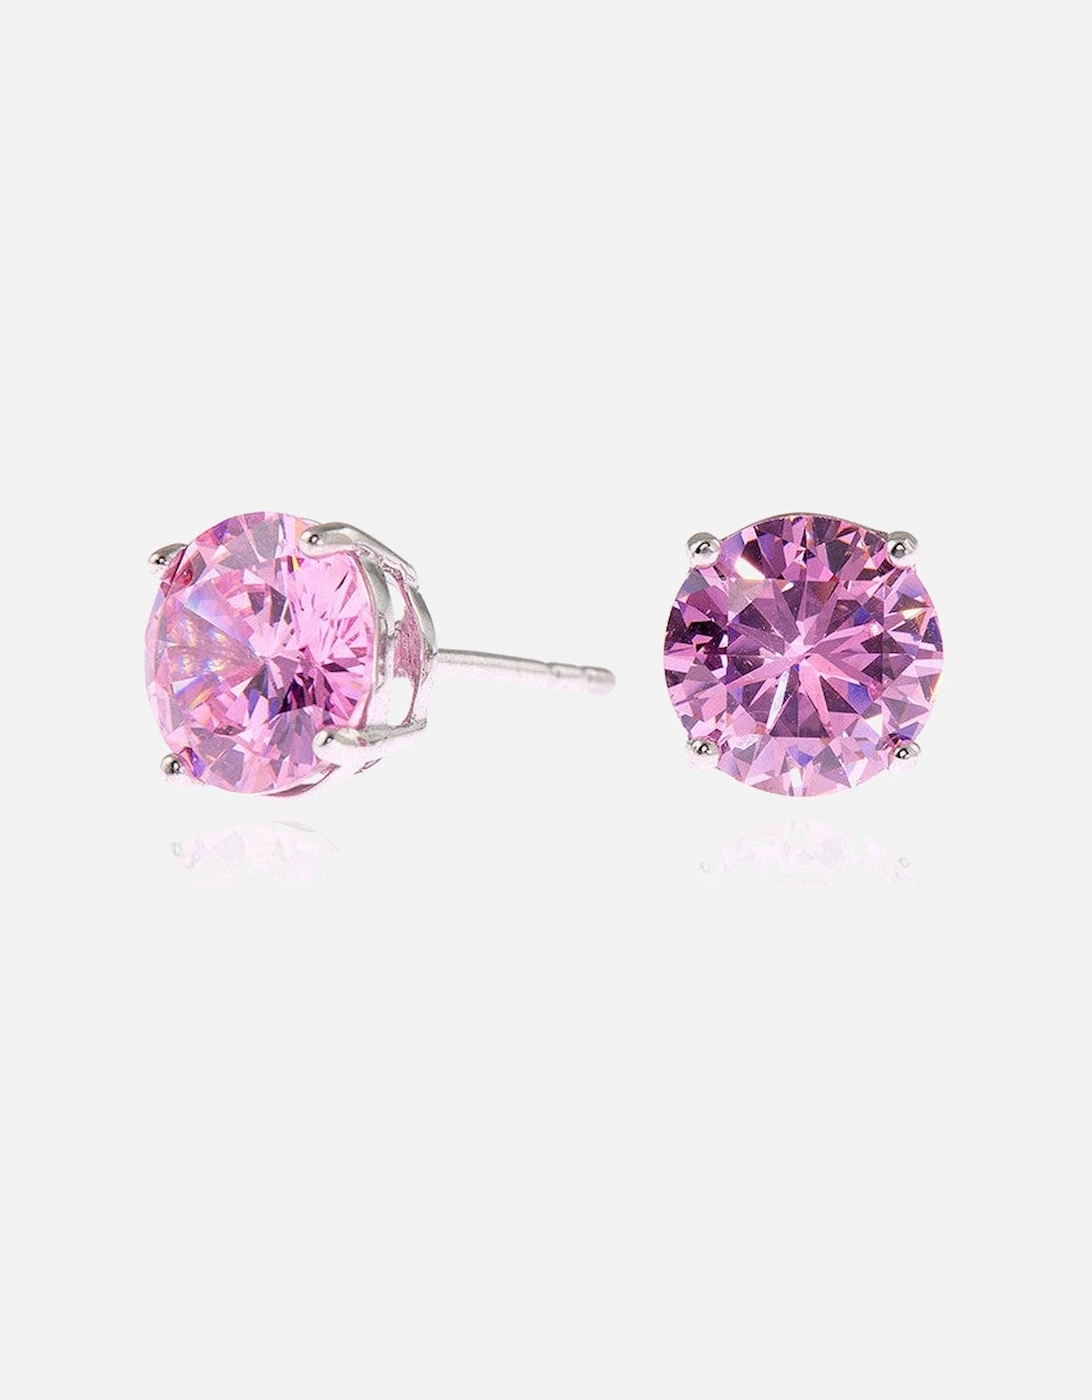 Cachet Lana 8mm Earrings Pink CZ Platinum Plated, 4 of 3